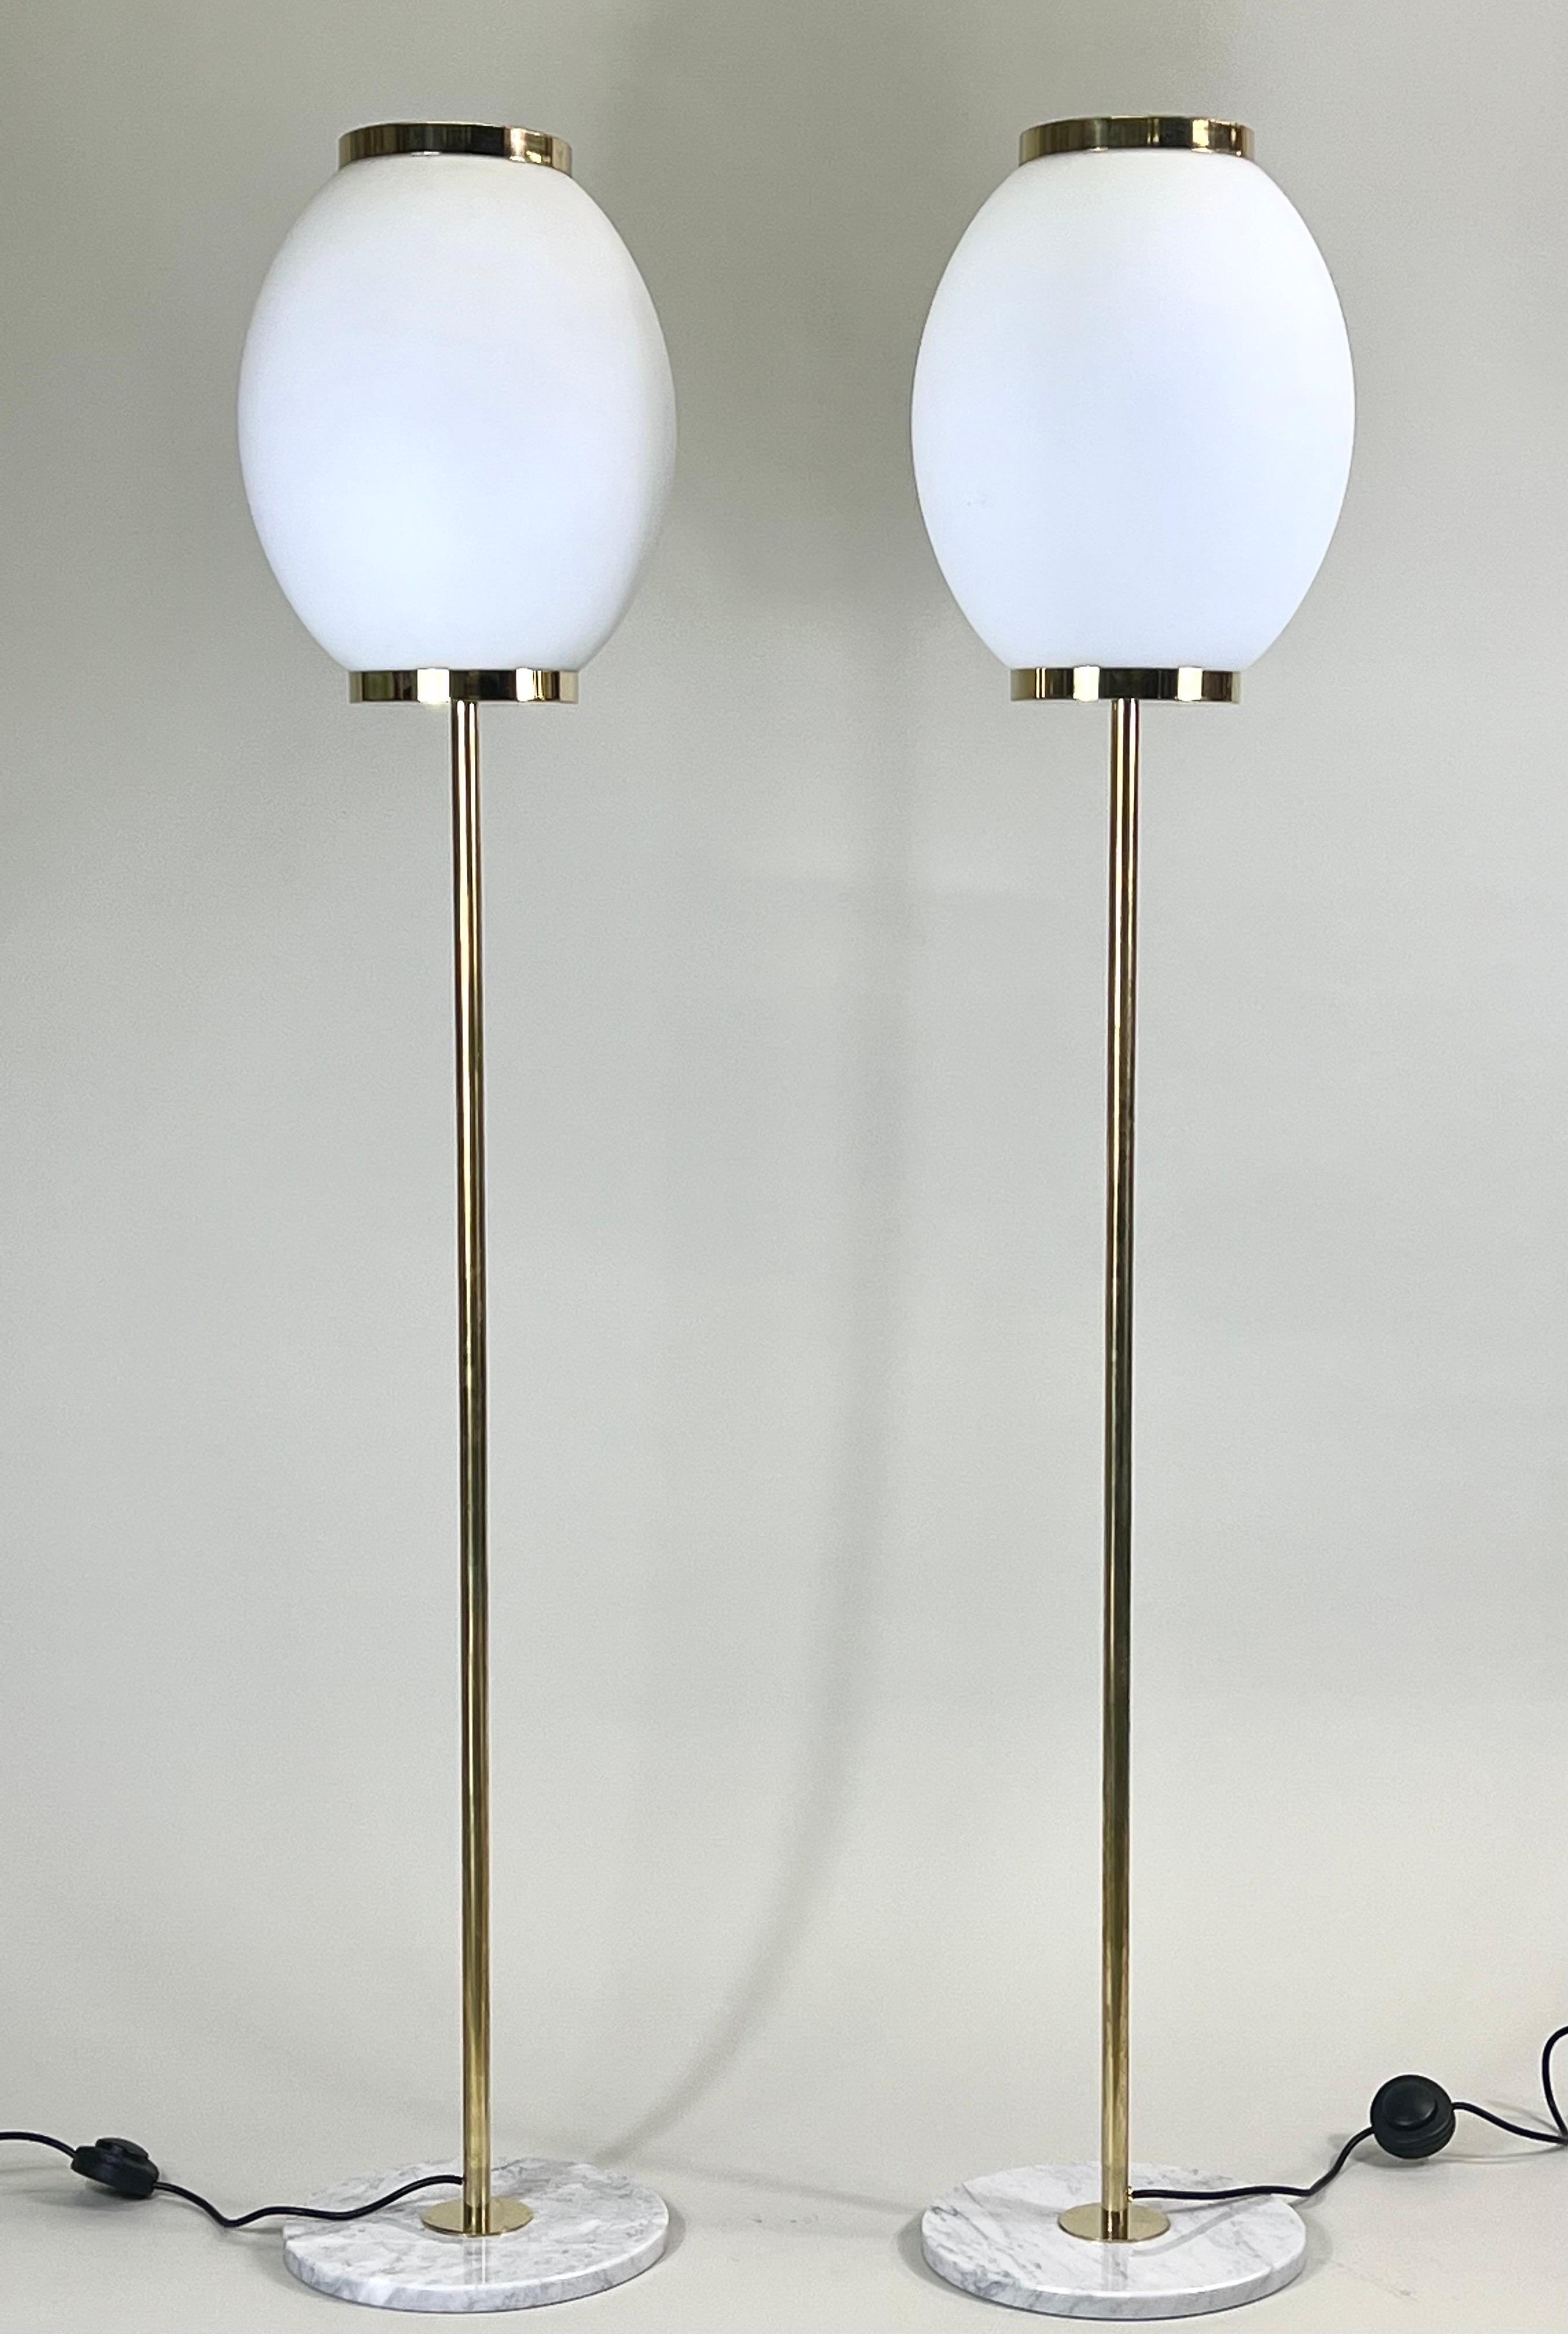 Elegant pair of Italian Mid-Century Modern style floor lamps attributed to Max Ingrand and Fontana Arte. The standing lamps have an understated, refined form and are composed of beautiful, complimentary materials. The pieces rest on round Italian